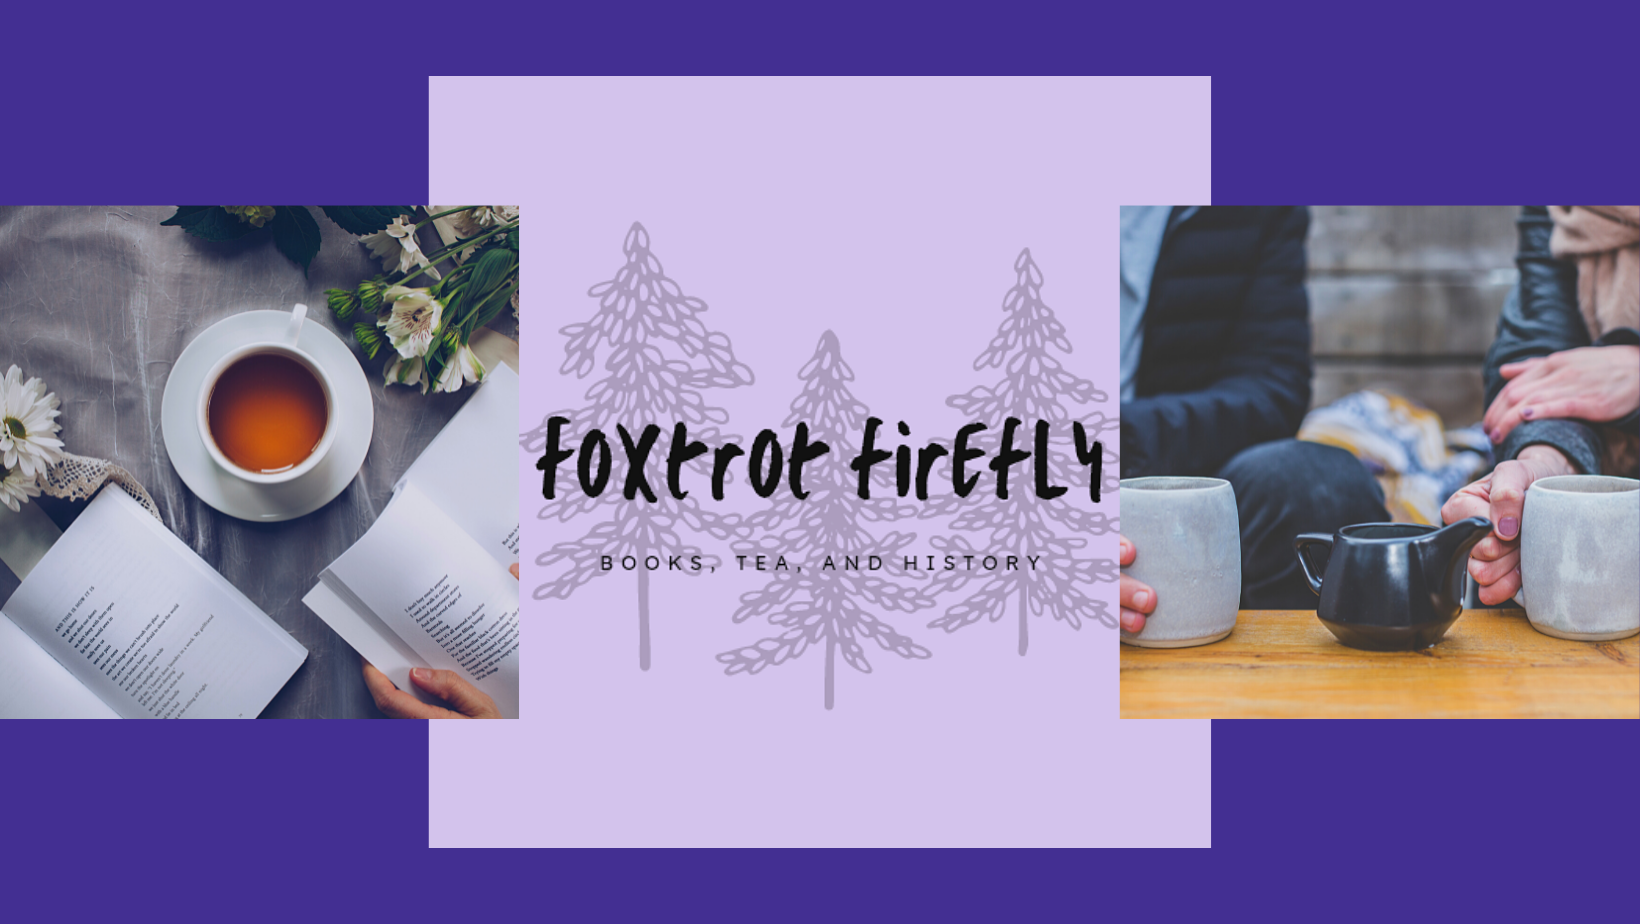 Header image stating "Foxtrot Firefly: History, Tea, and Books" with images of hot tea on either side.